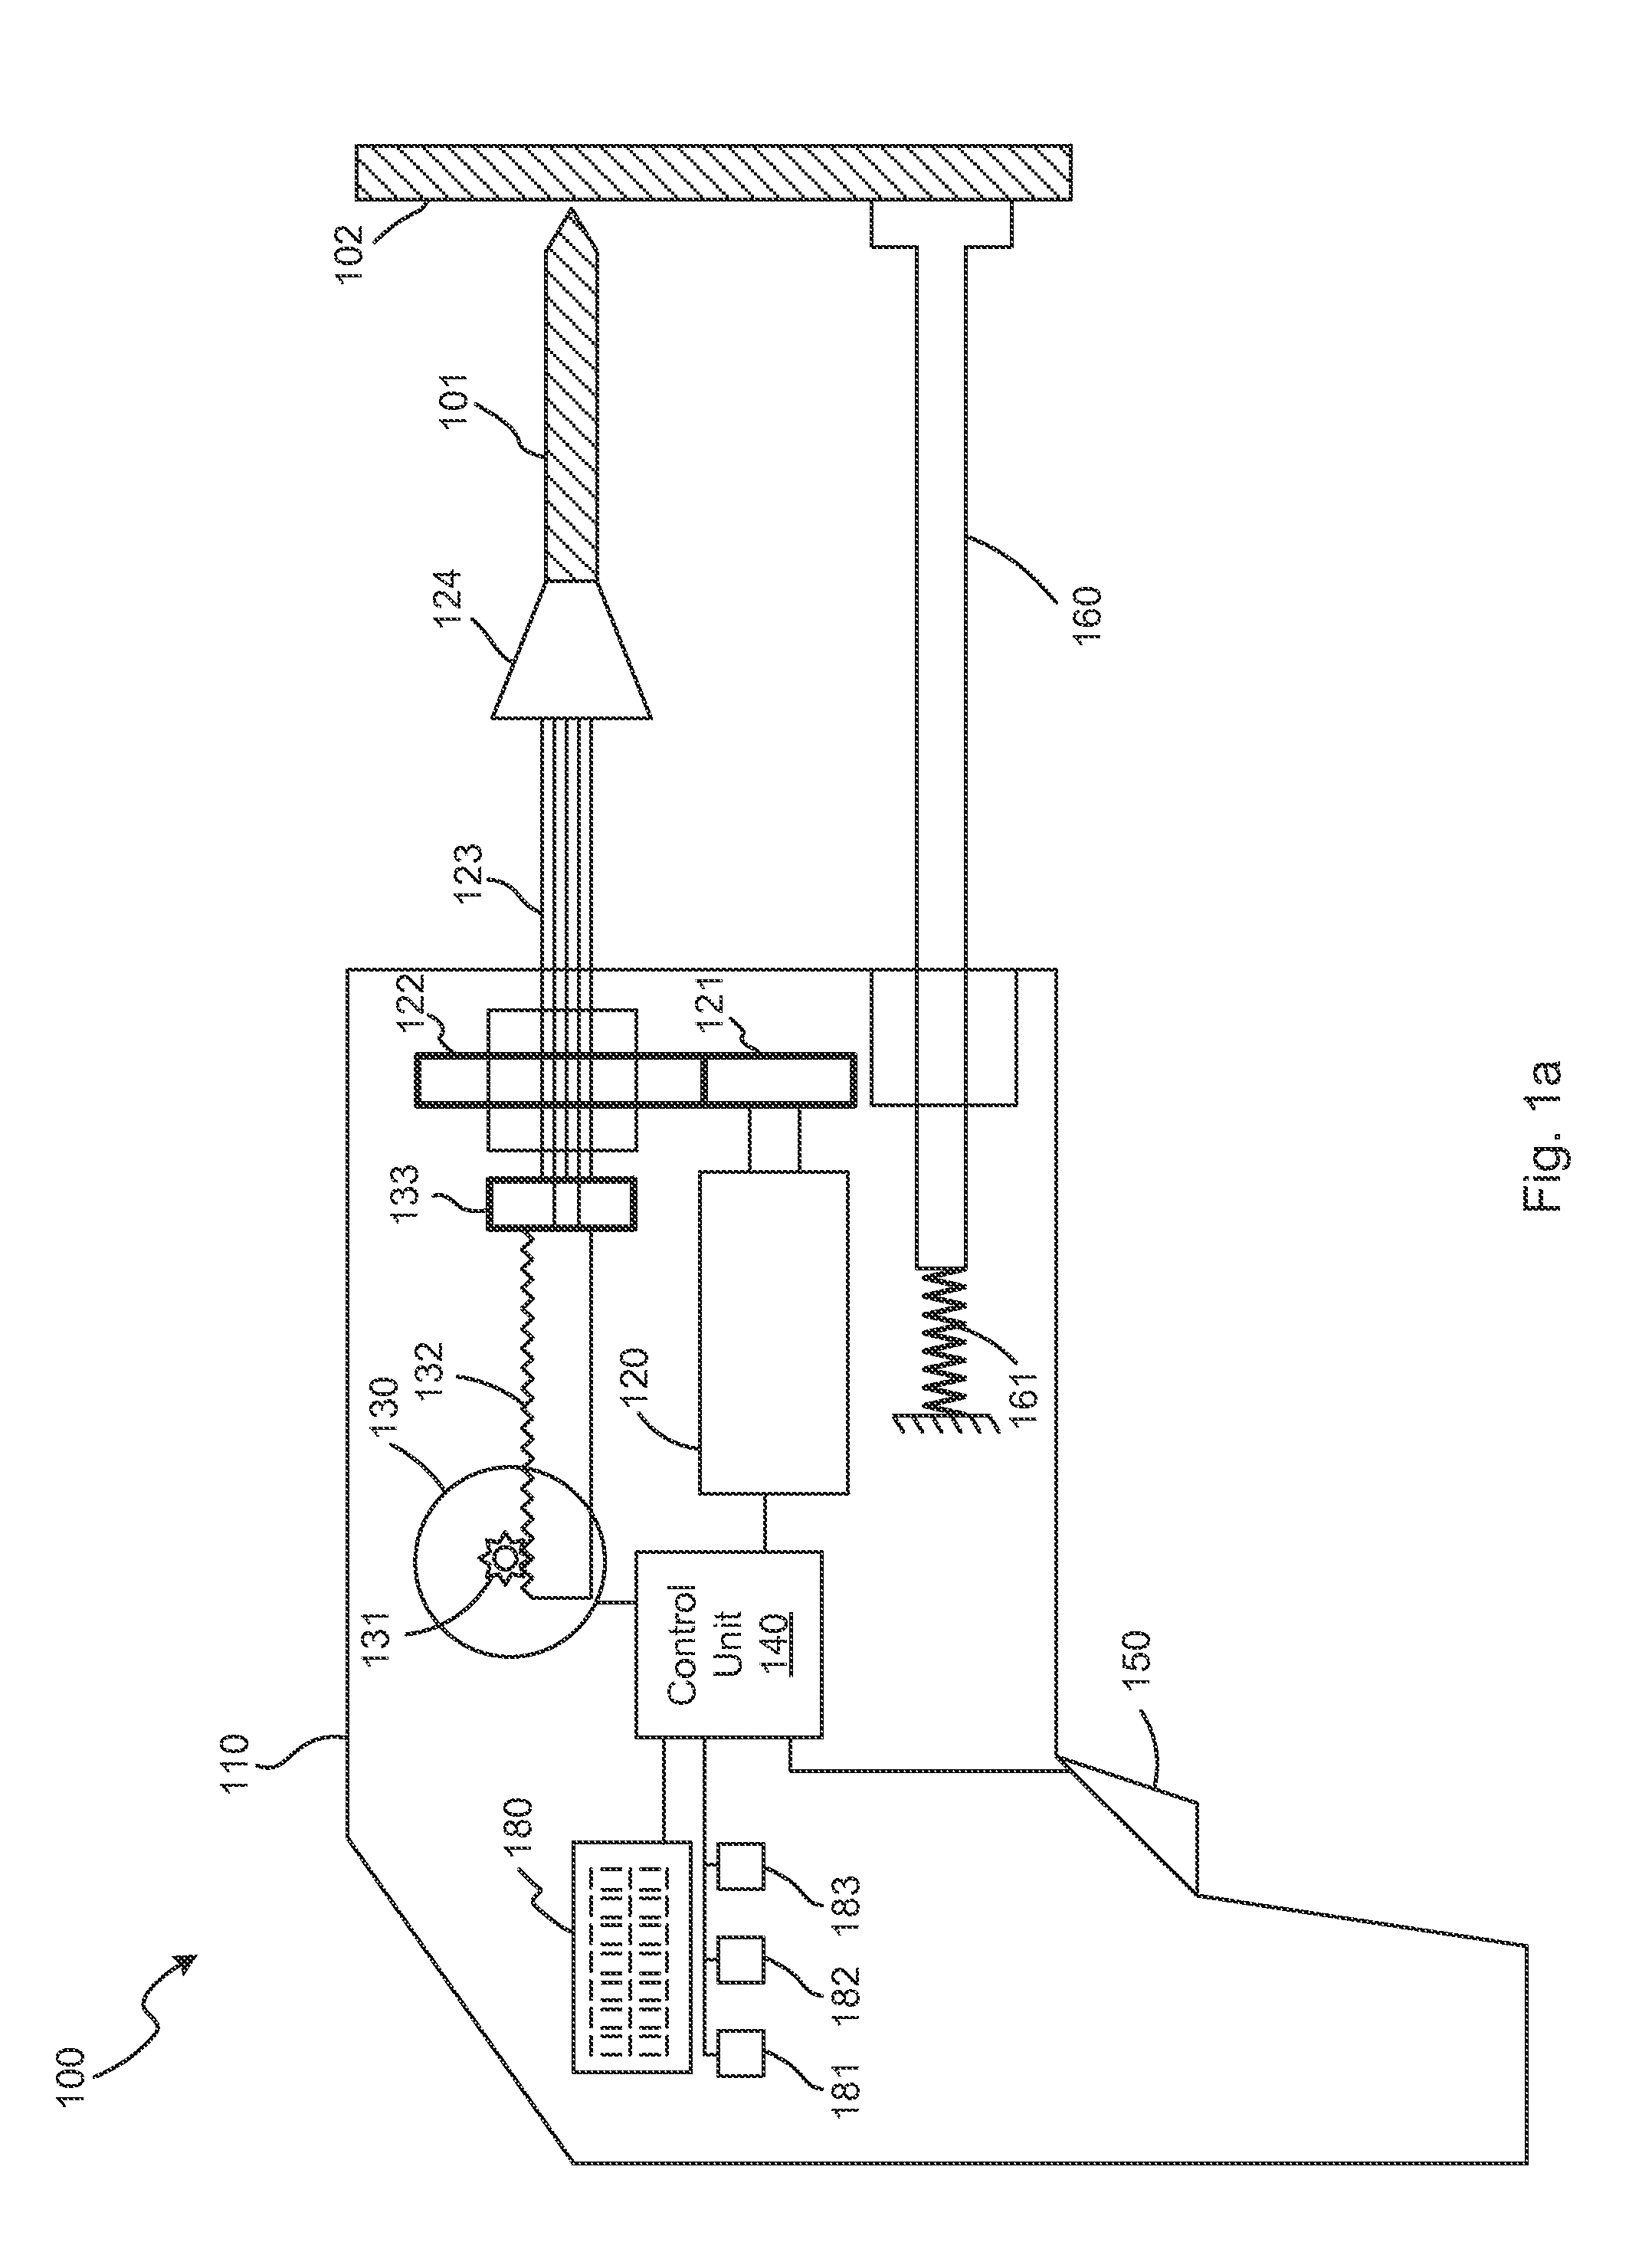 Drill assembly and method to reduce drill bit plunge